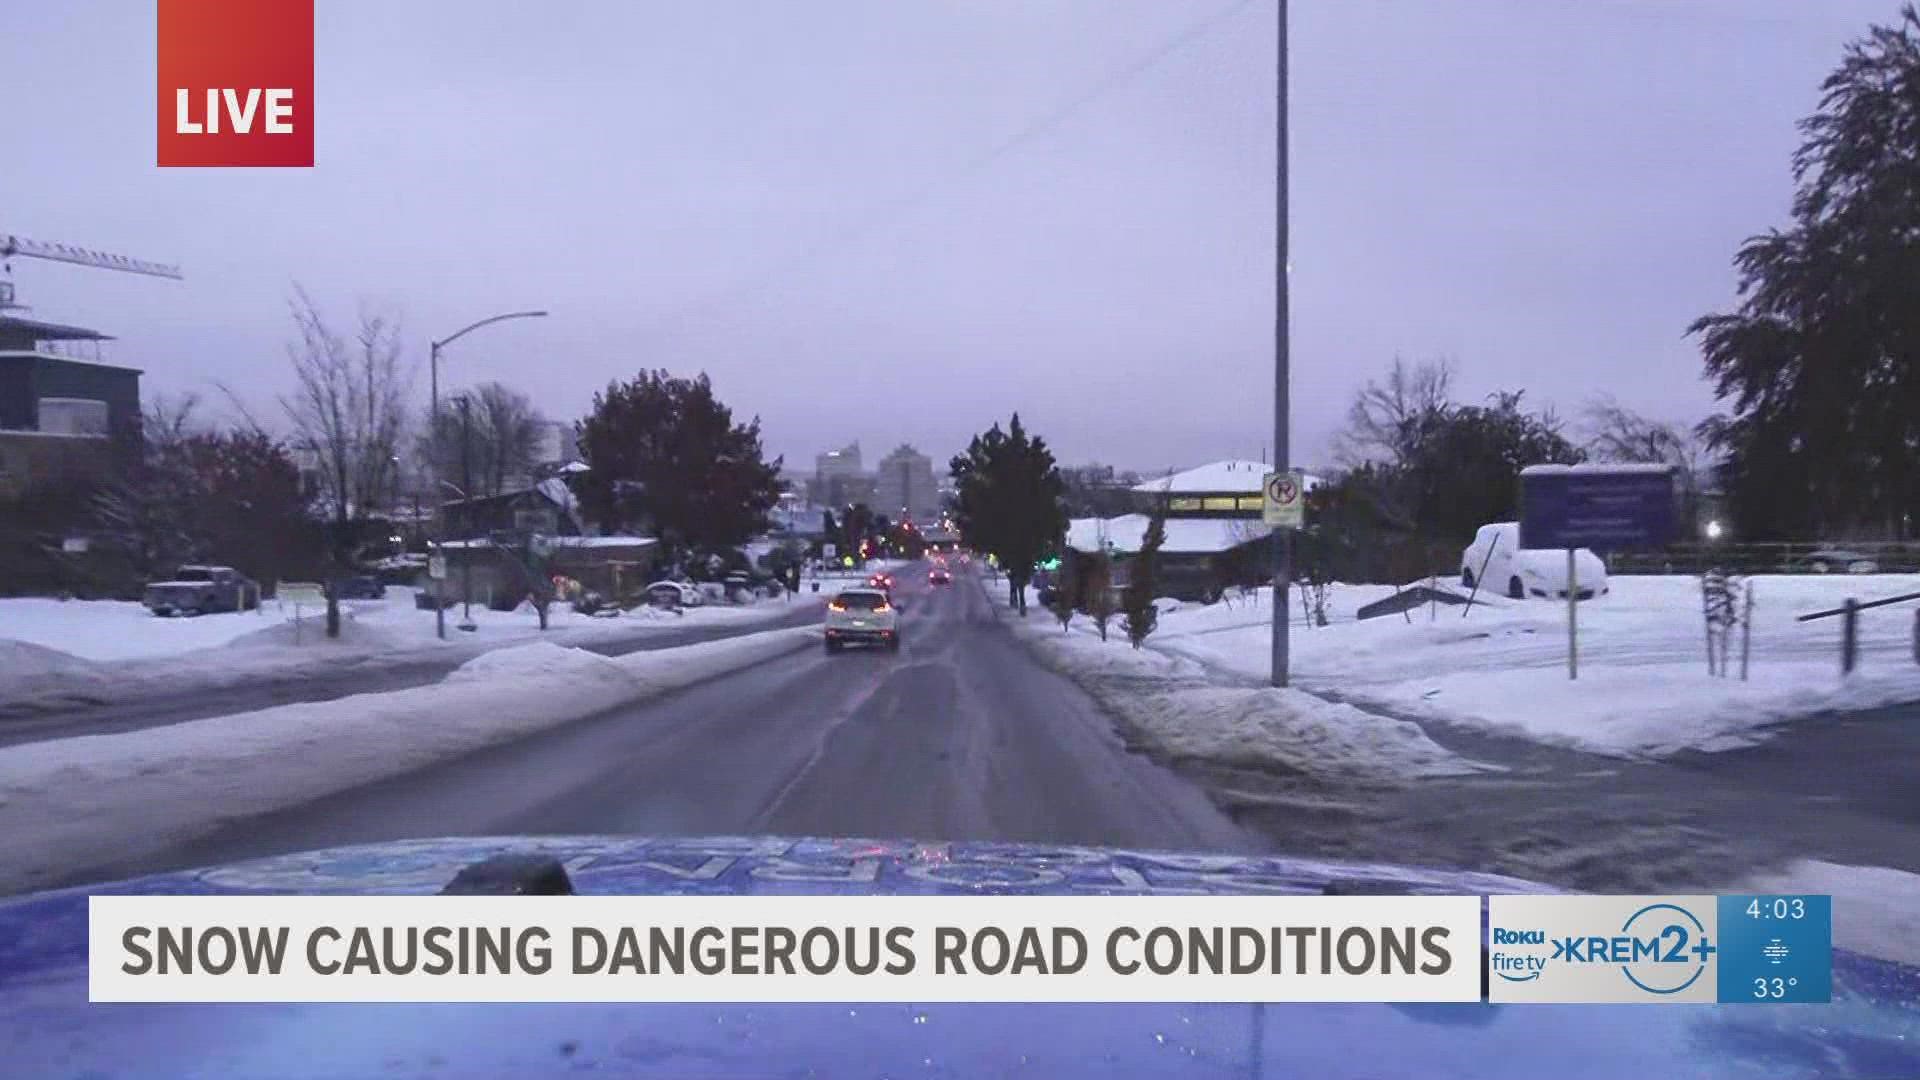 If people do need to travel, WSDOT is warning drivers to stay home.